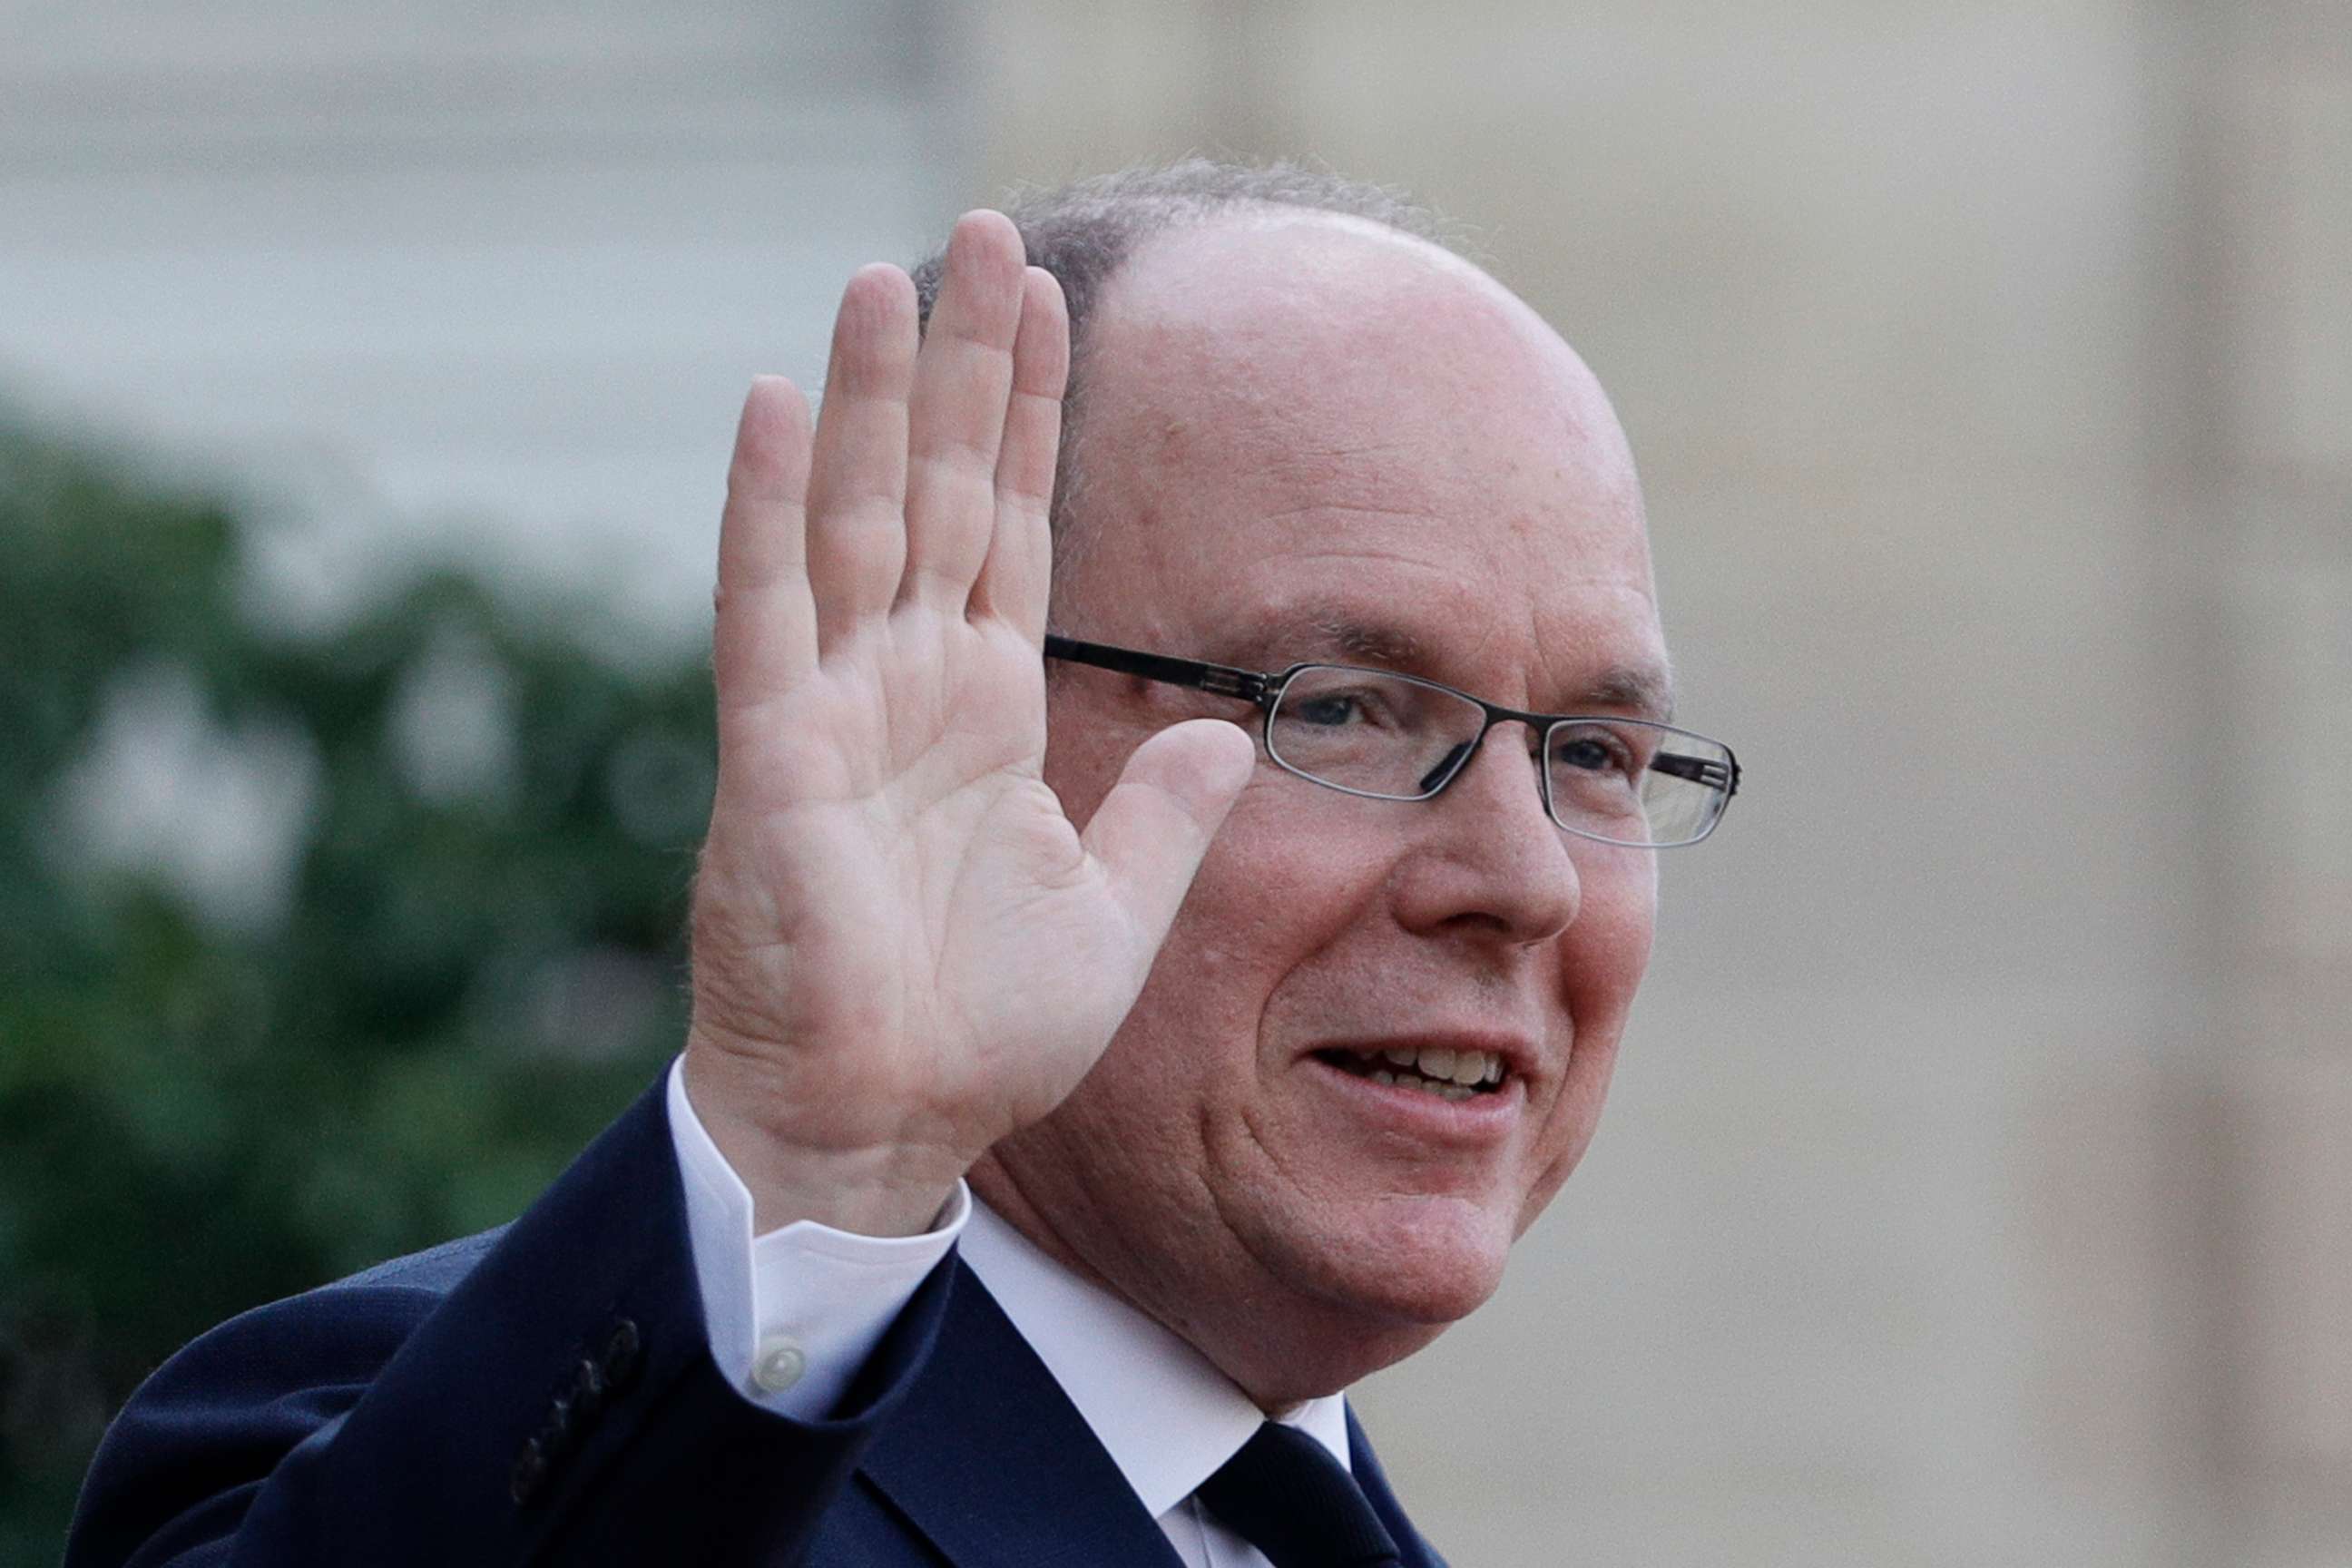 PHOTO: Prince Albert of Monaco leaves the Elysee Palace after a lunch with heads of states and officials, in Paris, Sept. 30, 2019.